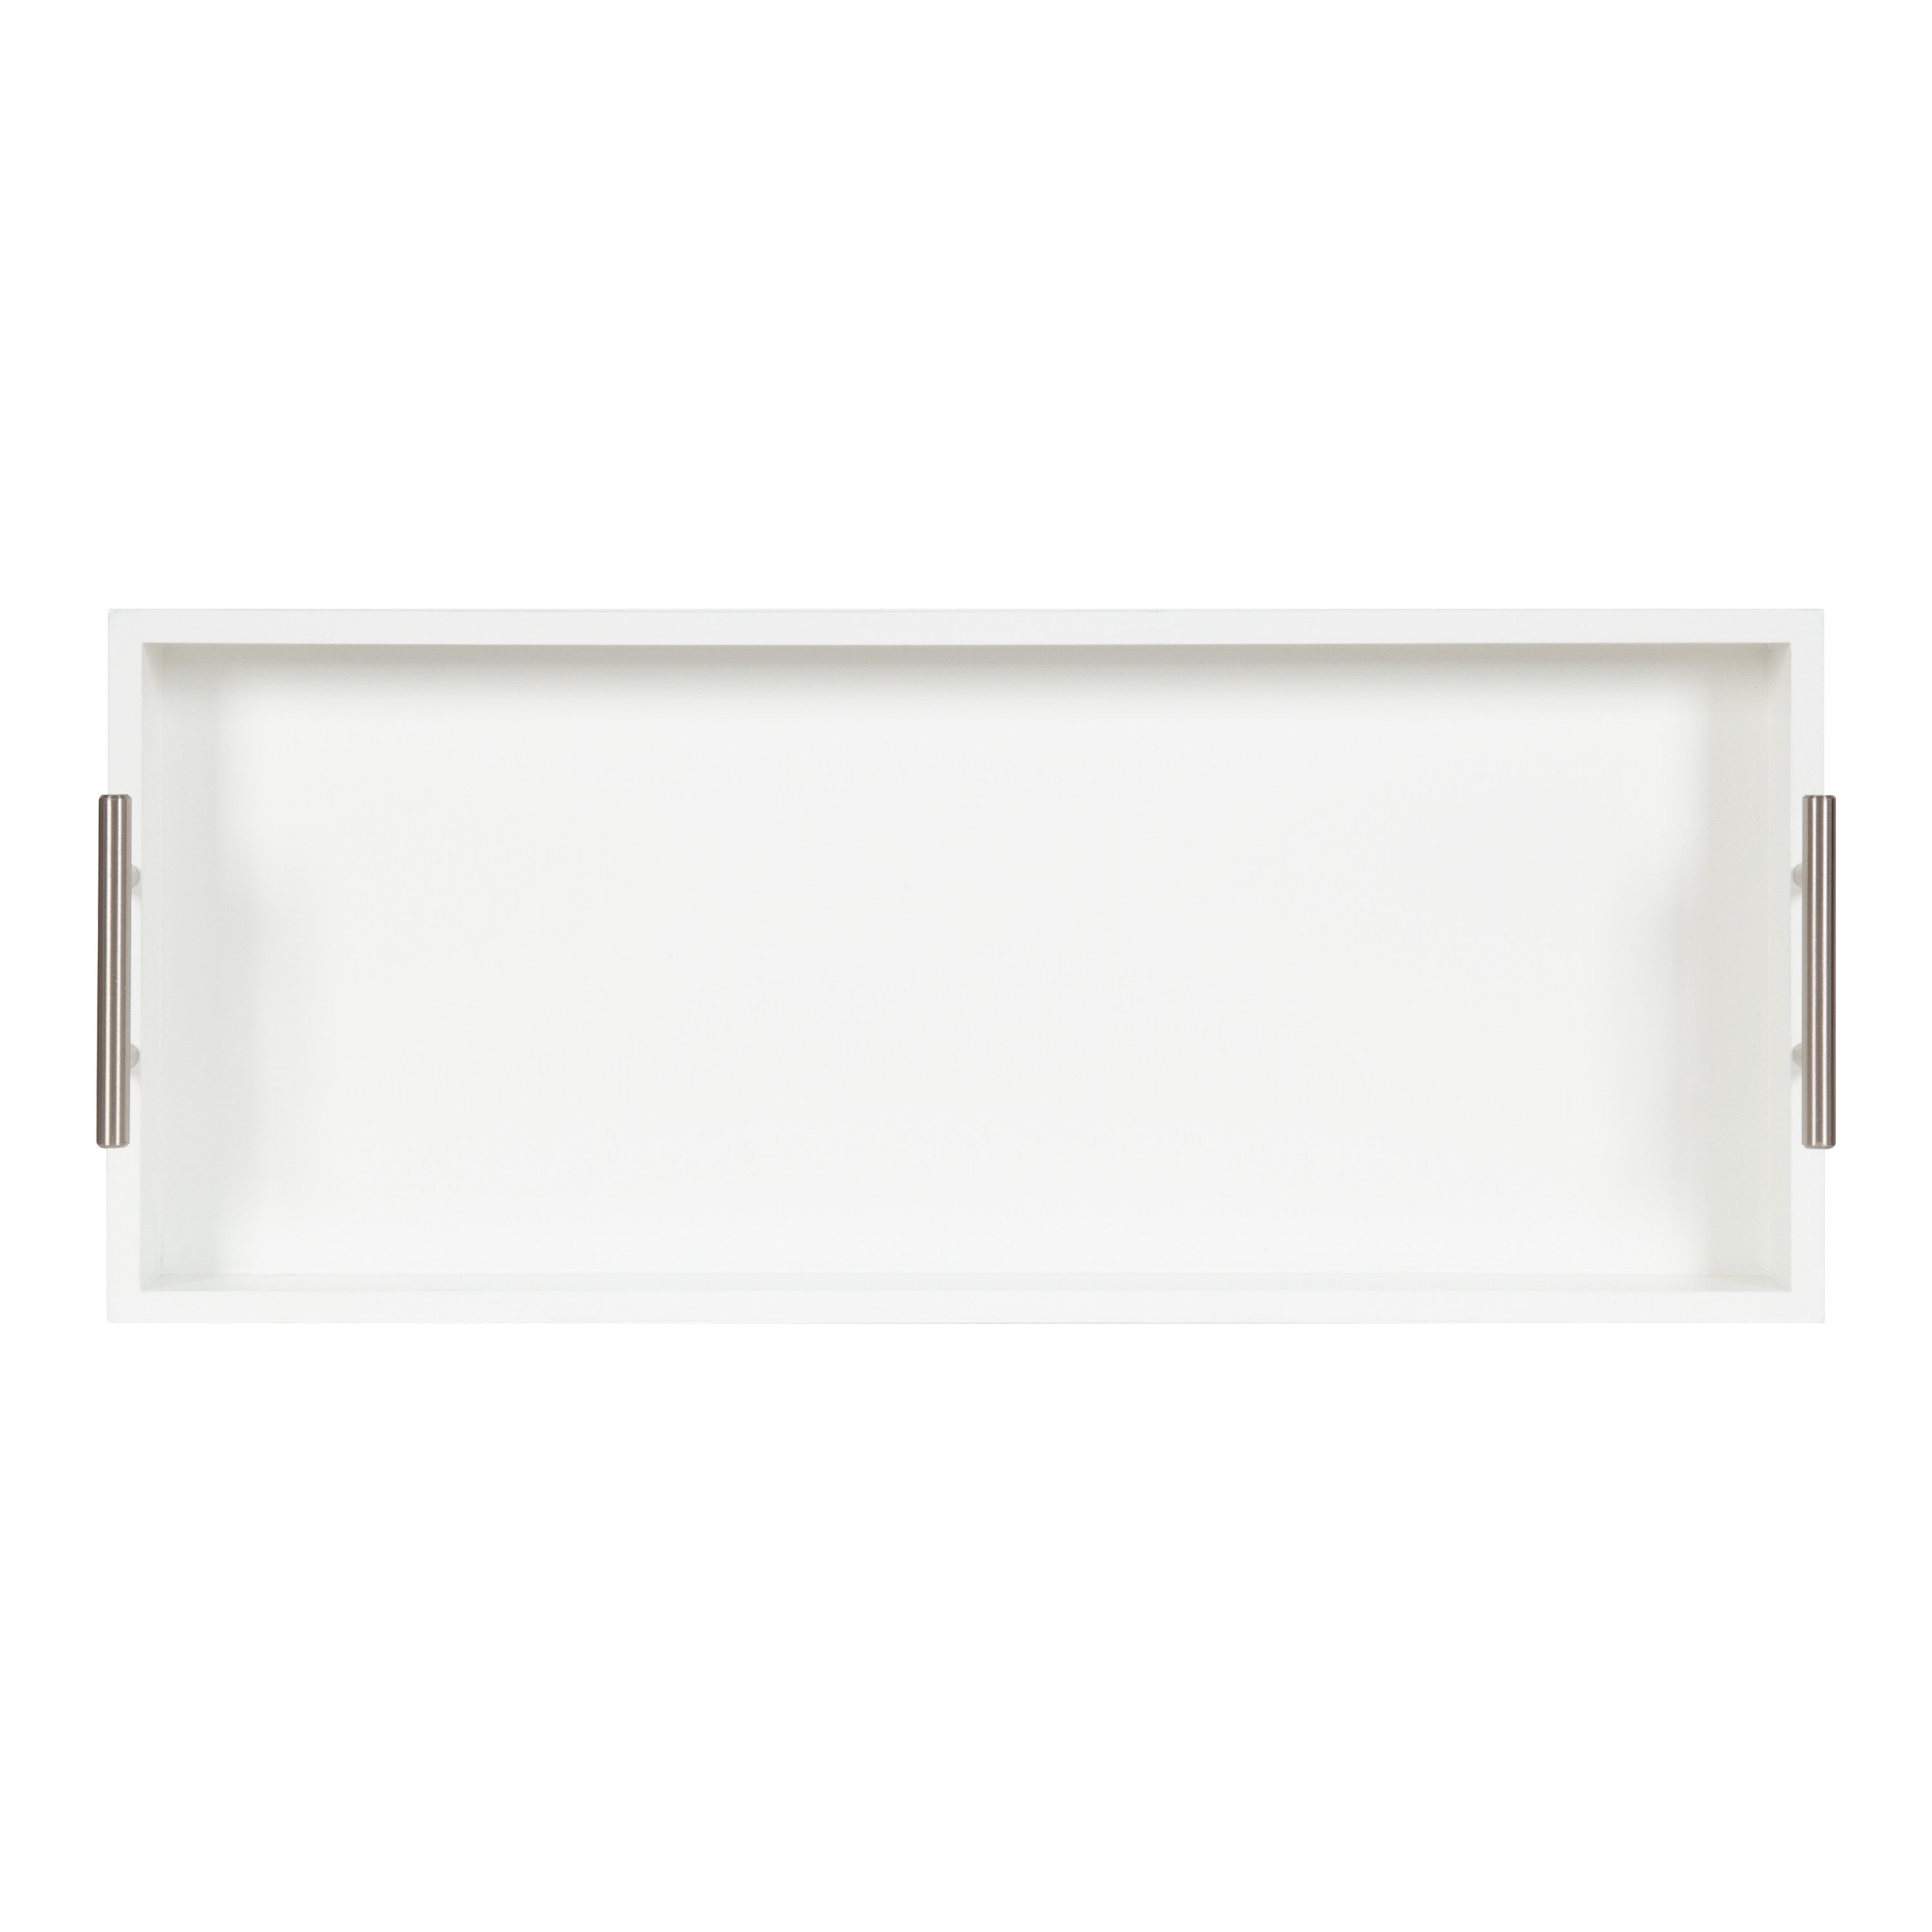 Kate and Laurel Bayville Wooden Decorative Tray - 10x24 - White